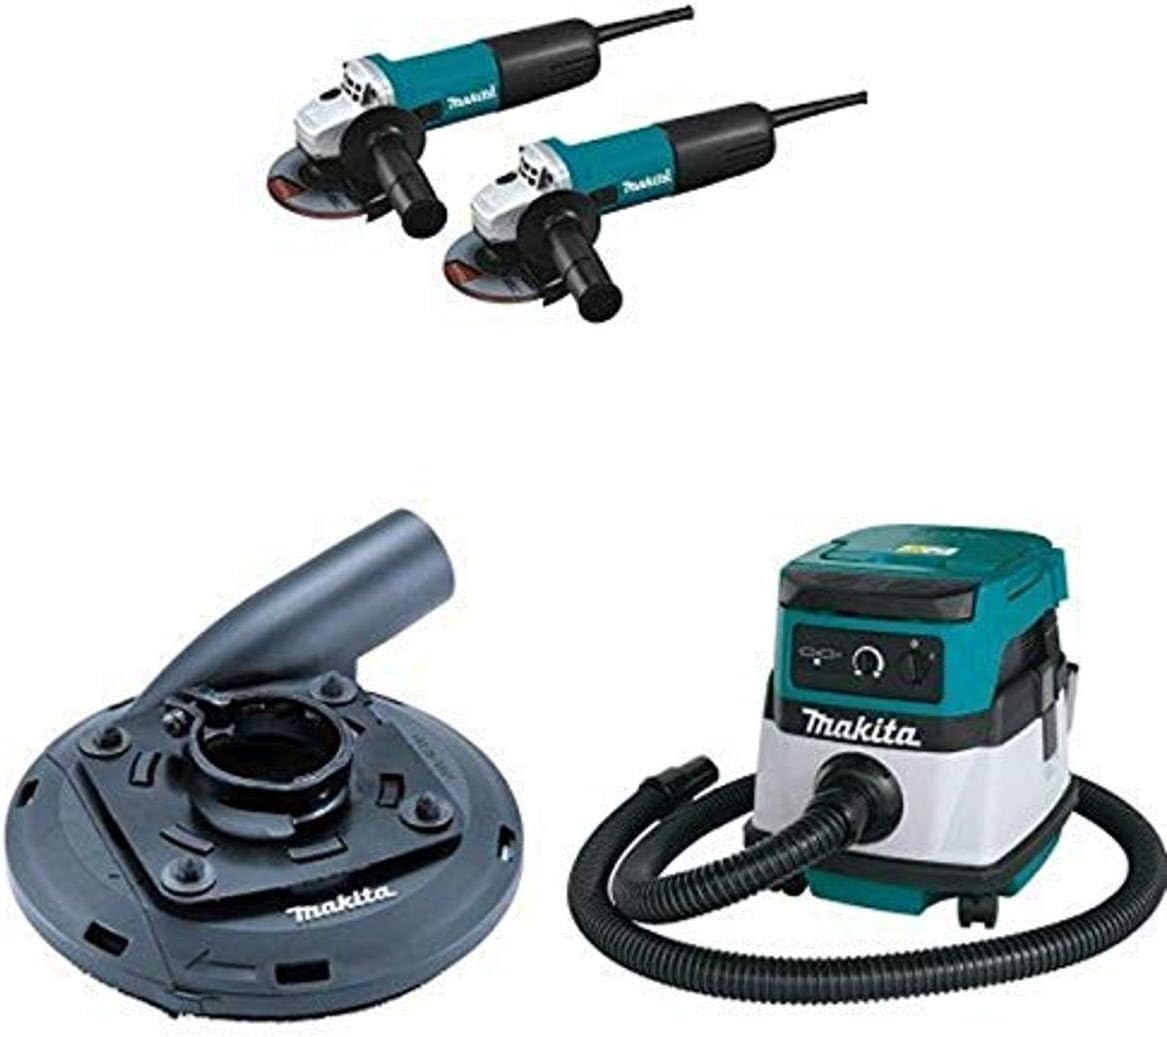 Makita 9557NB2 4-1/2-Inch Angle Grinder (2 Pack), 195236-5 4-1/2-Inch - 5-Inch Surface Grinding Shroud,  XCV04Z 18V X2 LXT (36V) 2.1 Gallon HEPA Filter Dry Dust Extractor/Vacuum